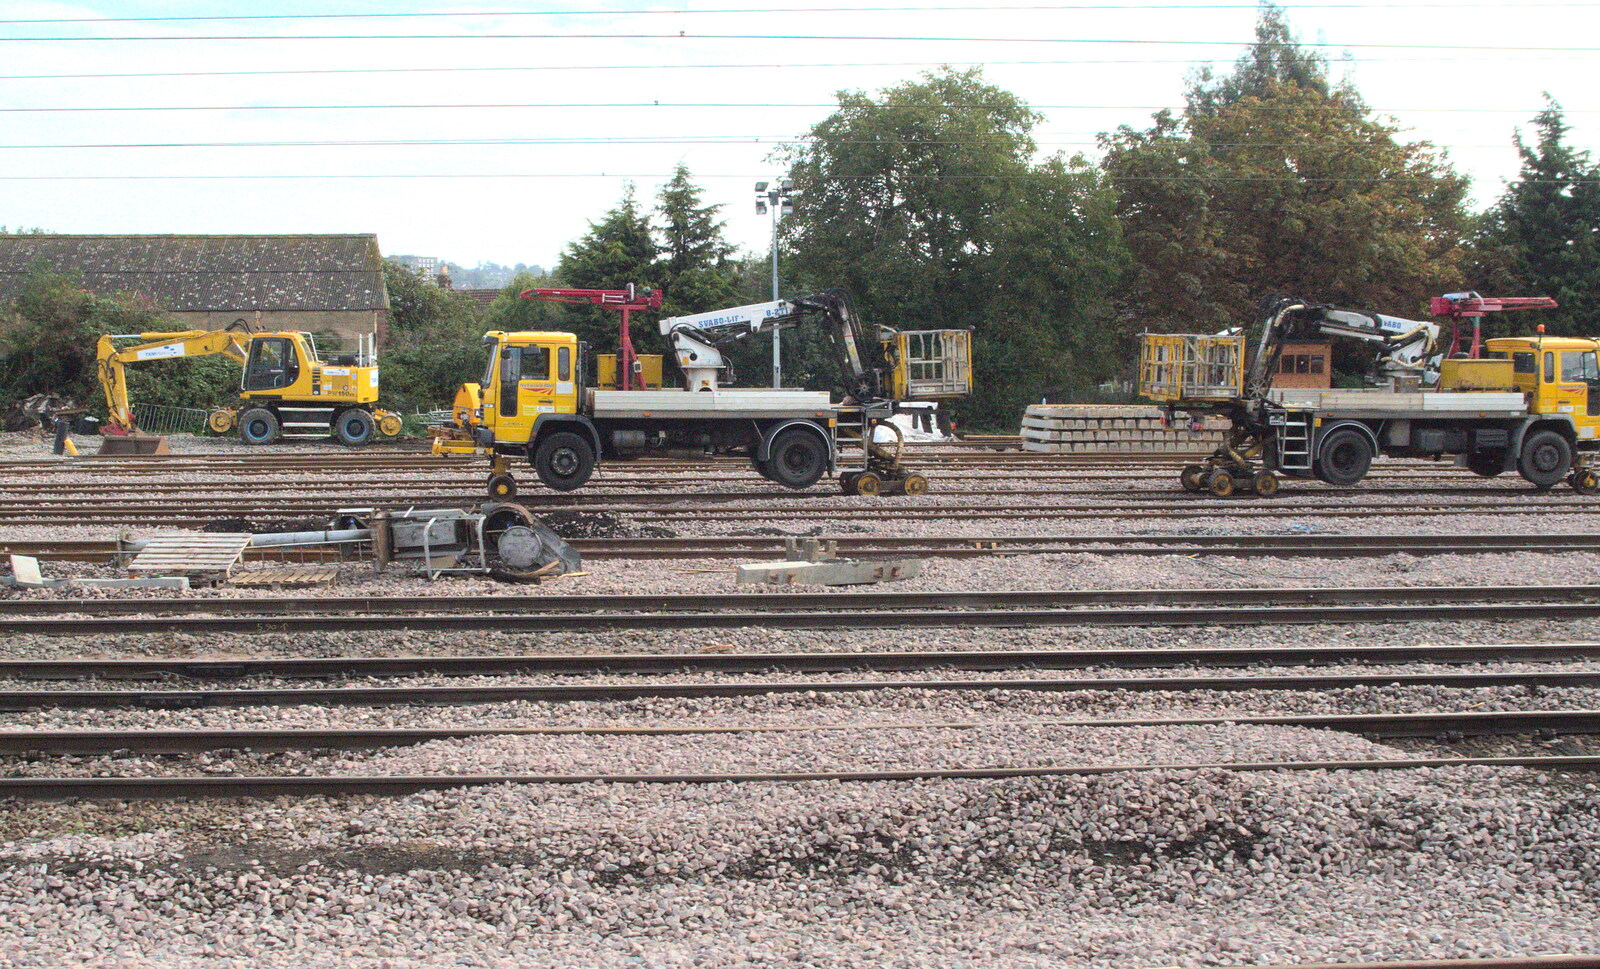 More floating lorries on train wheels from New Railway and a Trip to Ikea, Ipswich and Thurrock - 19th September 2014